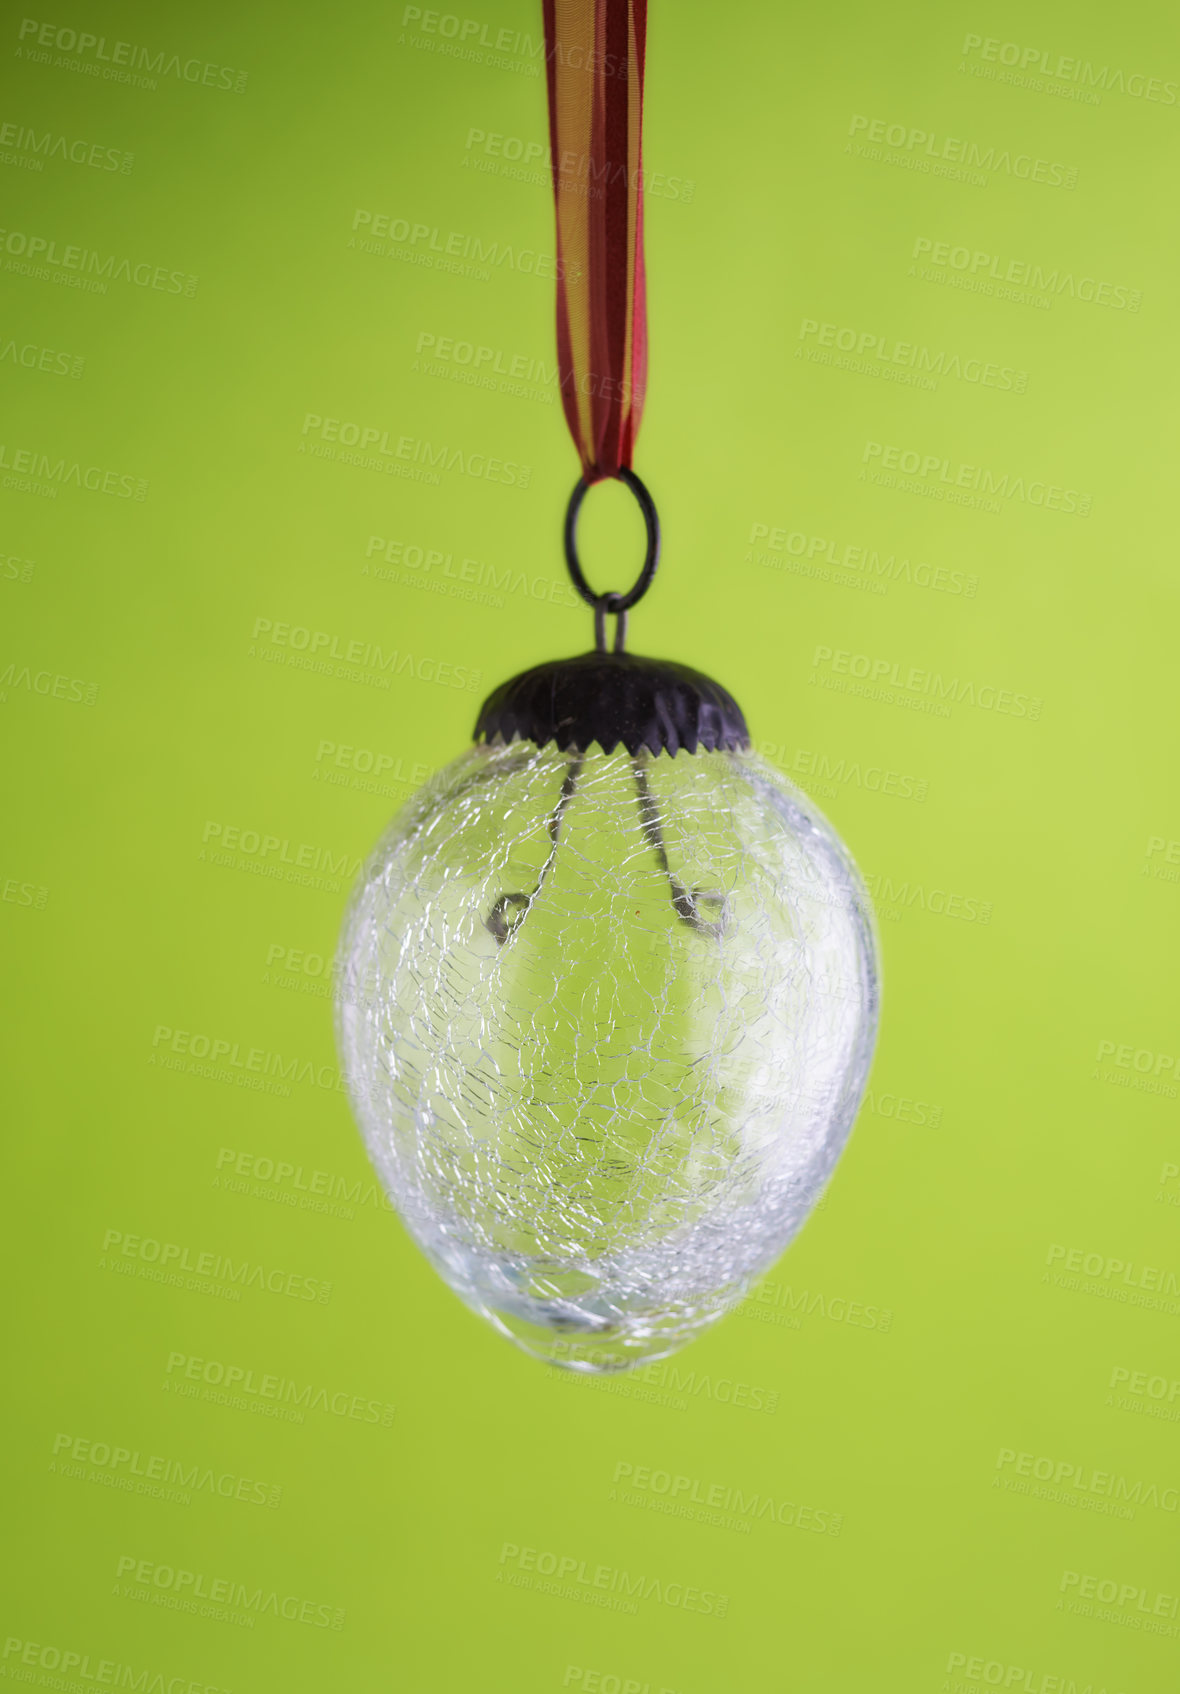 Buy stock photo Closeup of a glass lightbulb against a green copyspace background. Zoom in on lightbulb details with no electricity to power, energy crisis, turned off for load shedding, power outage or blackout